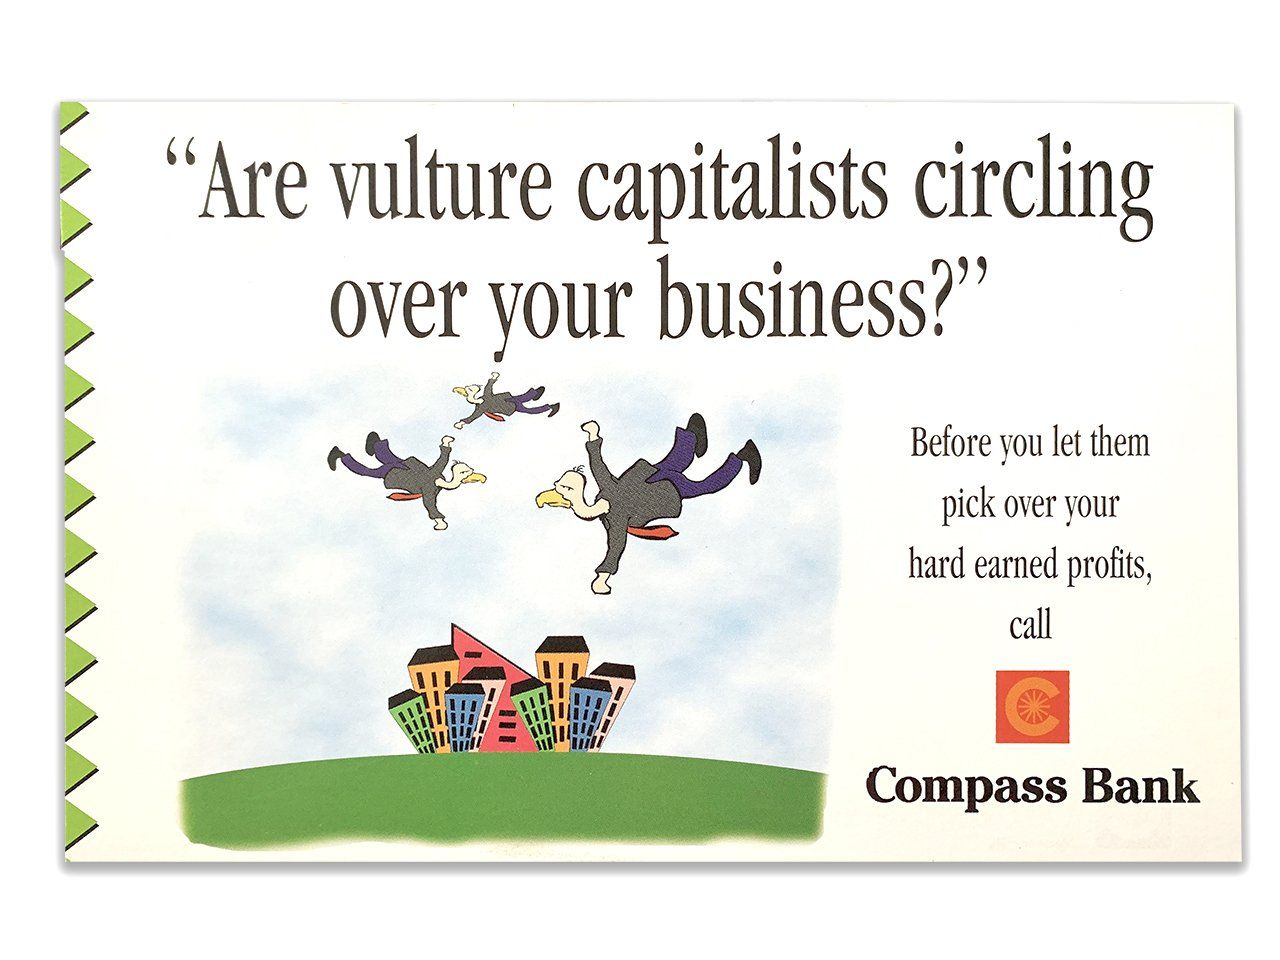 An advertisement for compass bank that says 